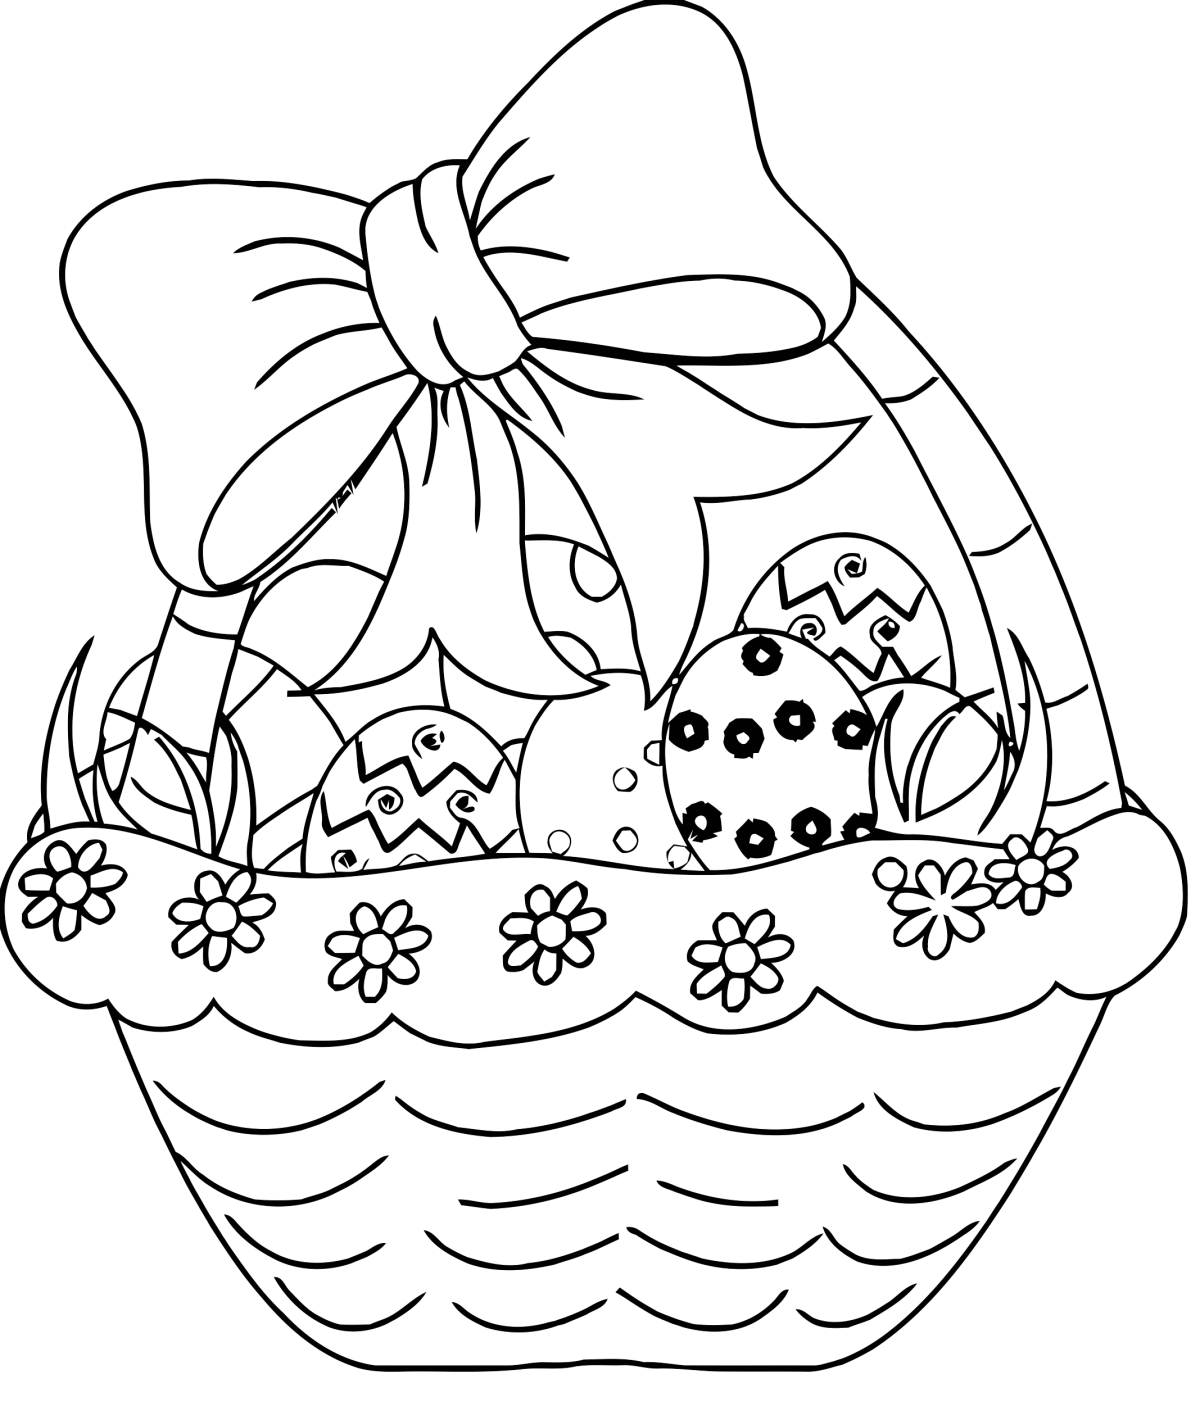 Passover image to download and color - Easter Kids Coloring Pages